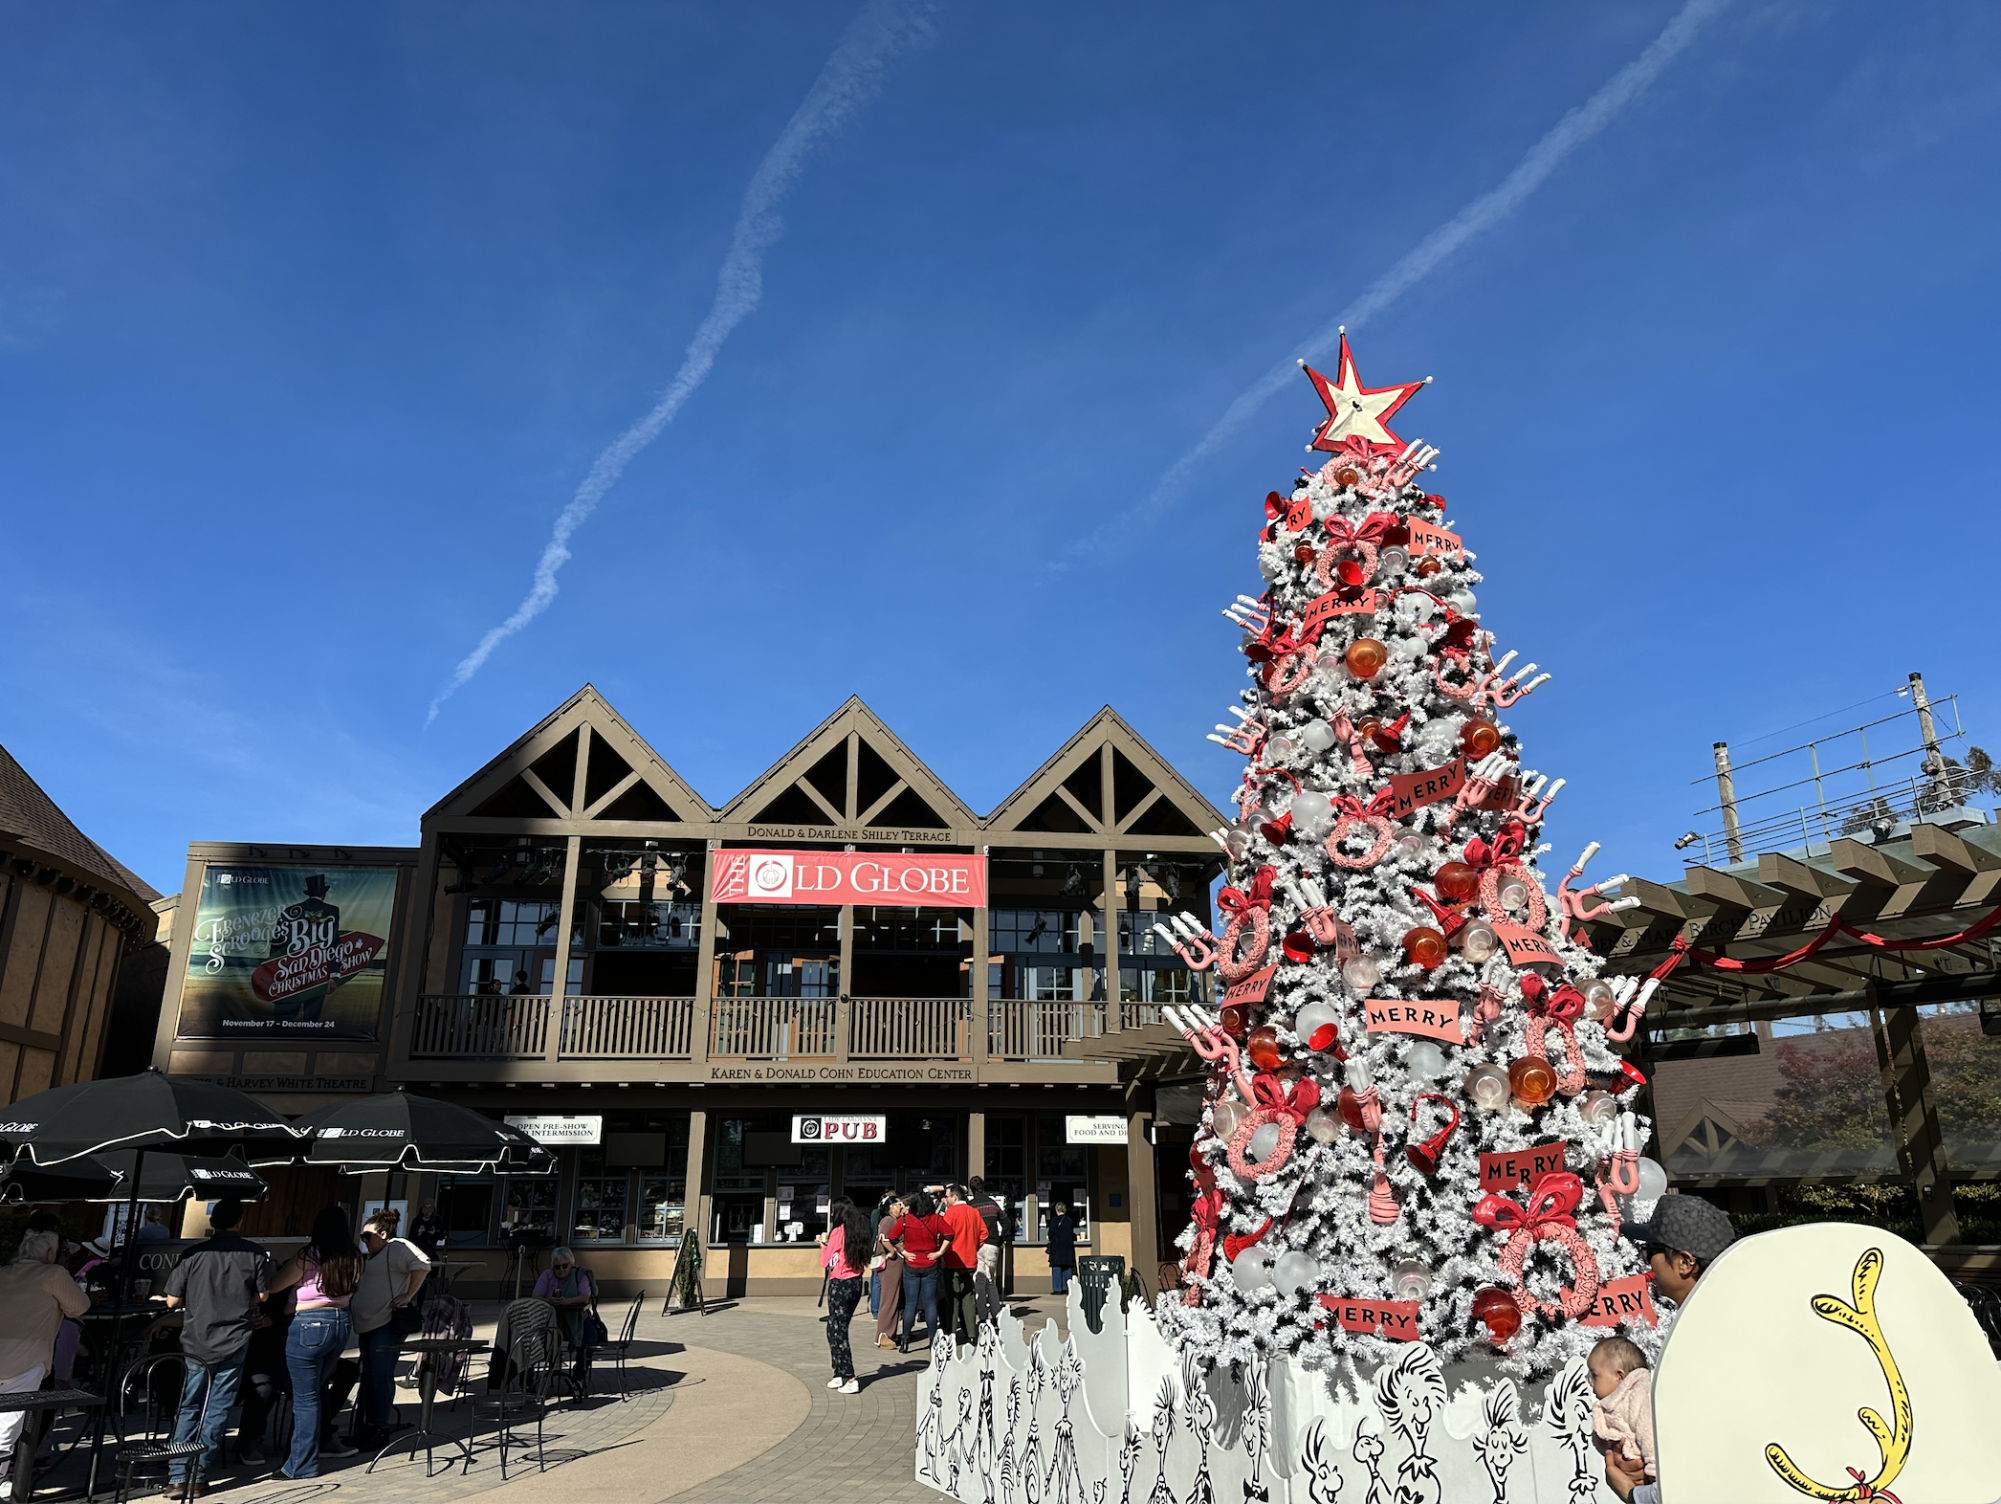 The big tree stands proud with red and white “who-like” decorations in front of the theater for kids to take pictures.